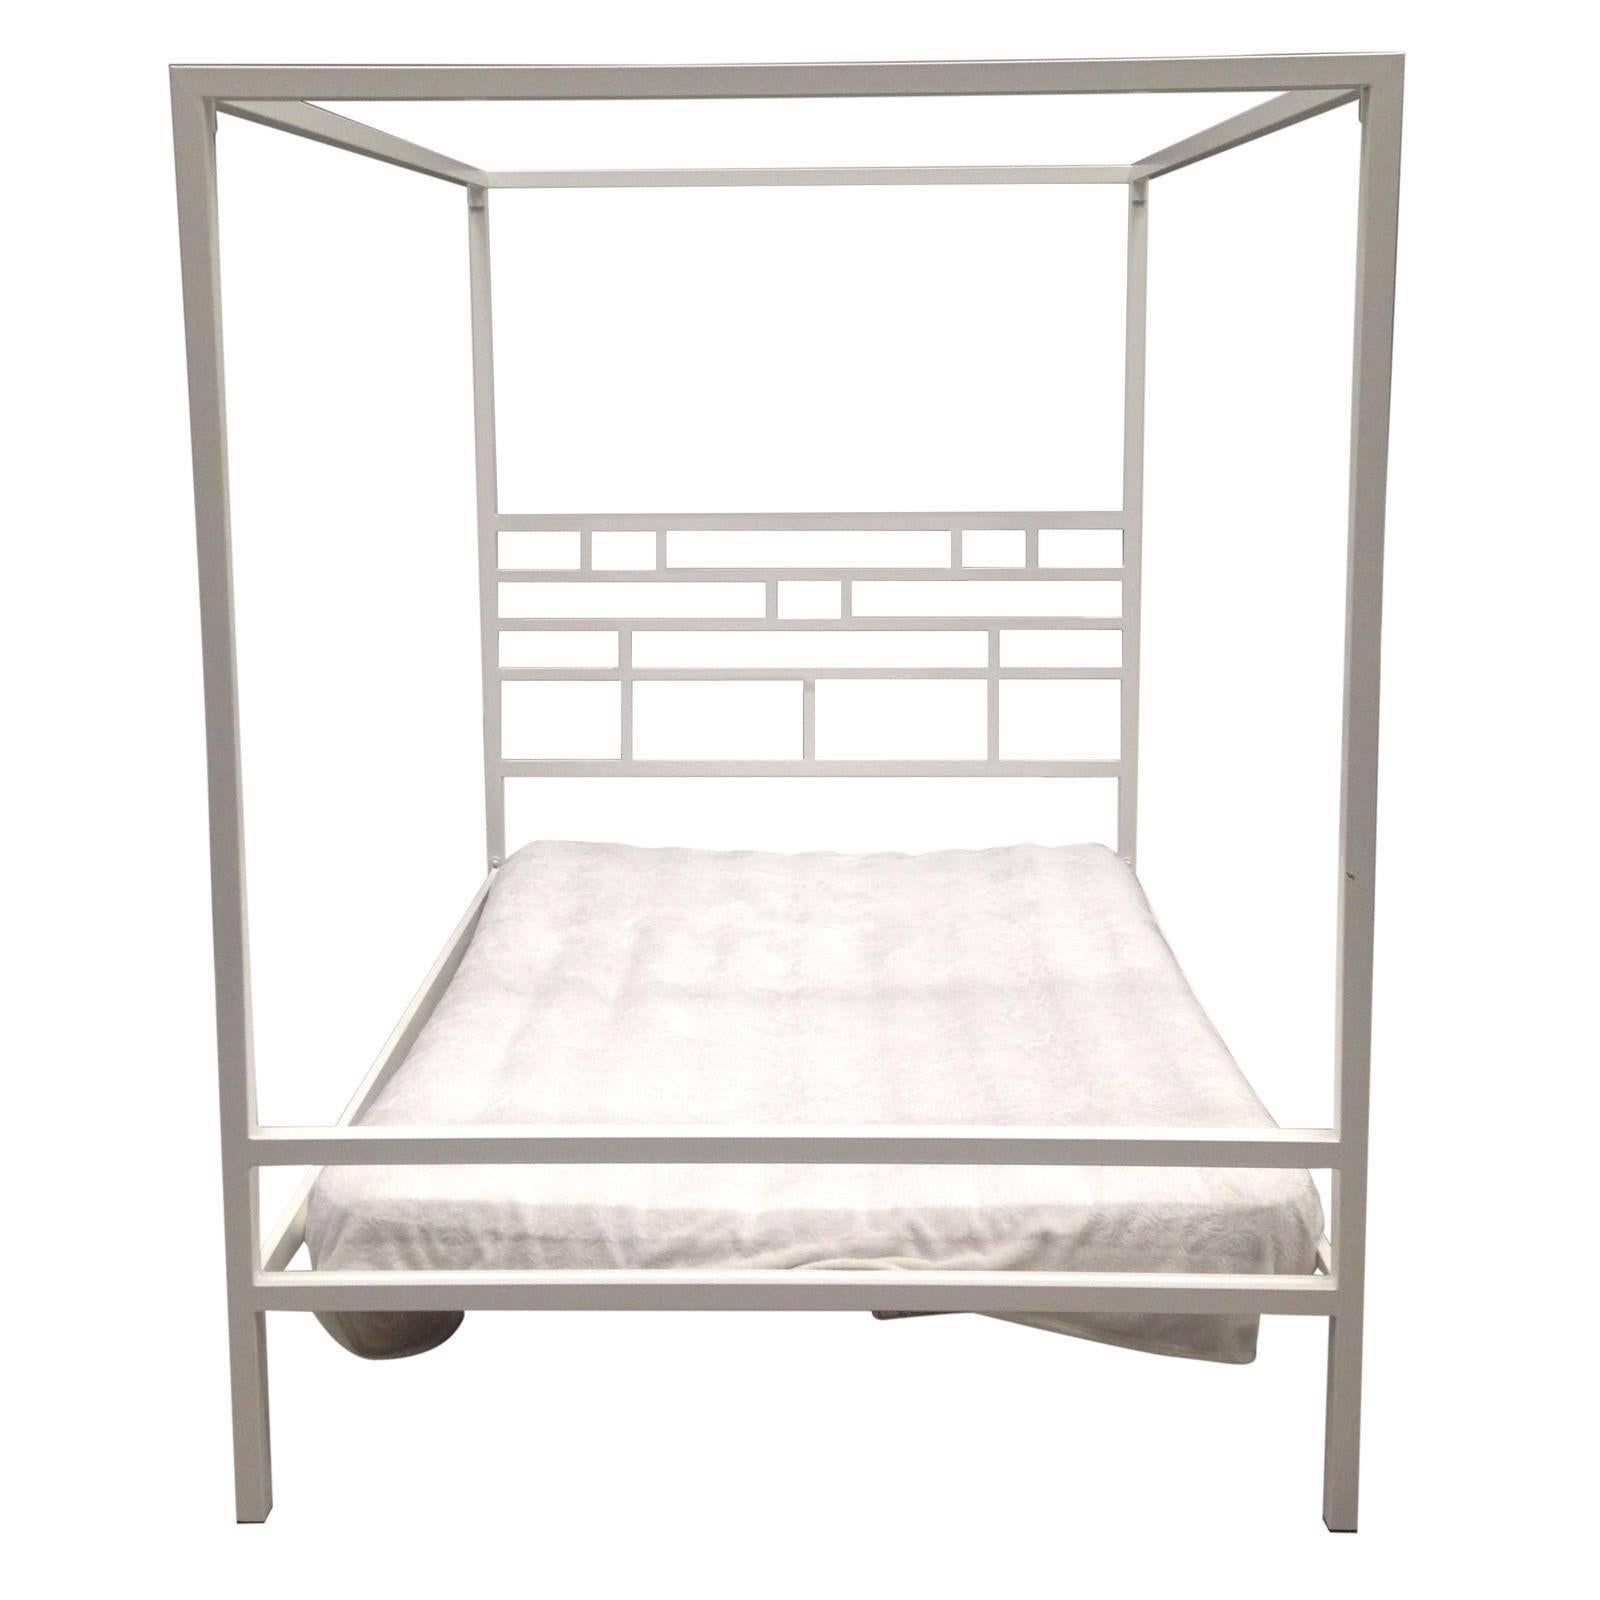 Four-Poster Canopy Bed or Daybed in Wrought Iron. Indoor & Outdoor